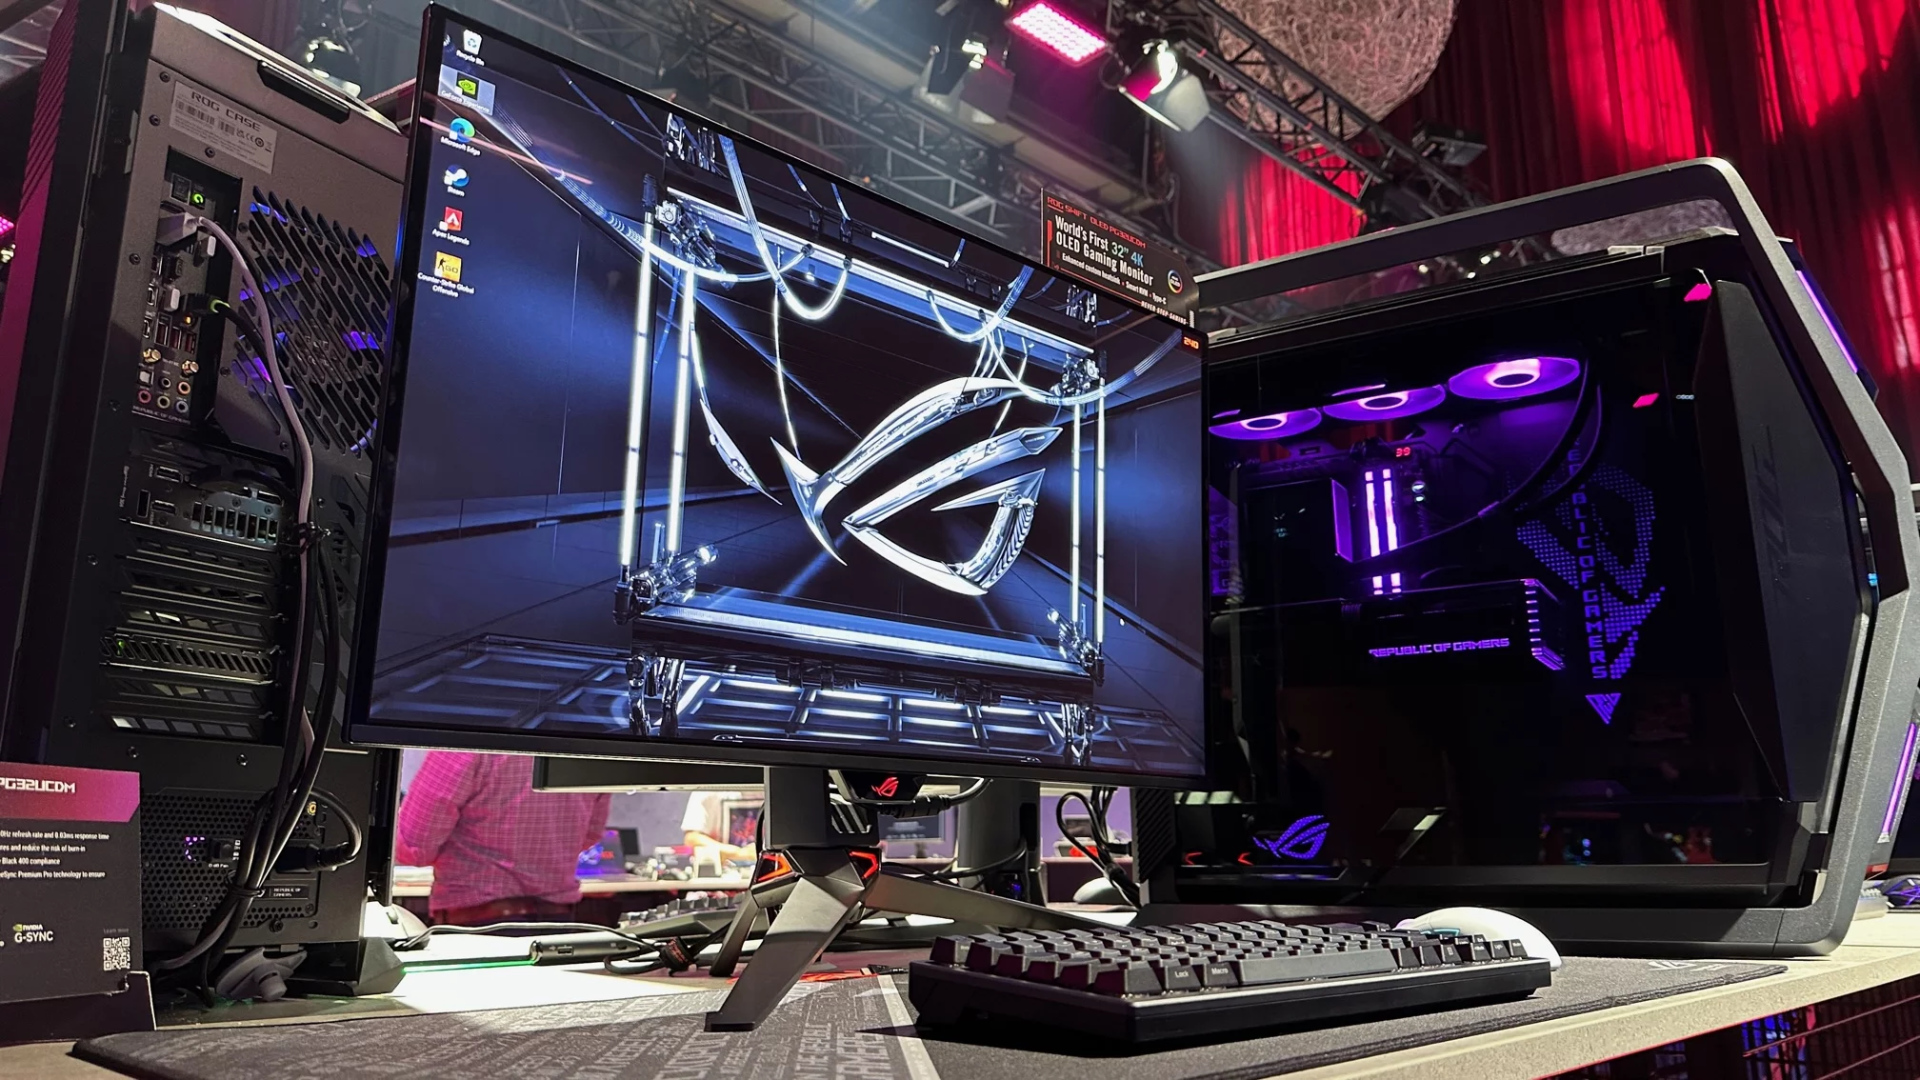 ASUS sheds light on their ROG Swift Pro PG248QP gaming display - OC3D